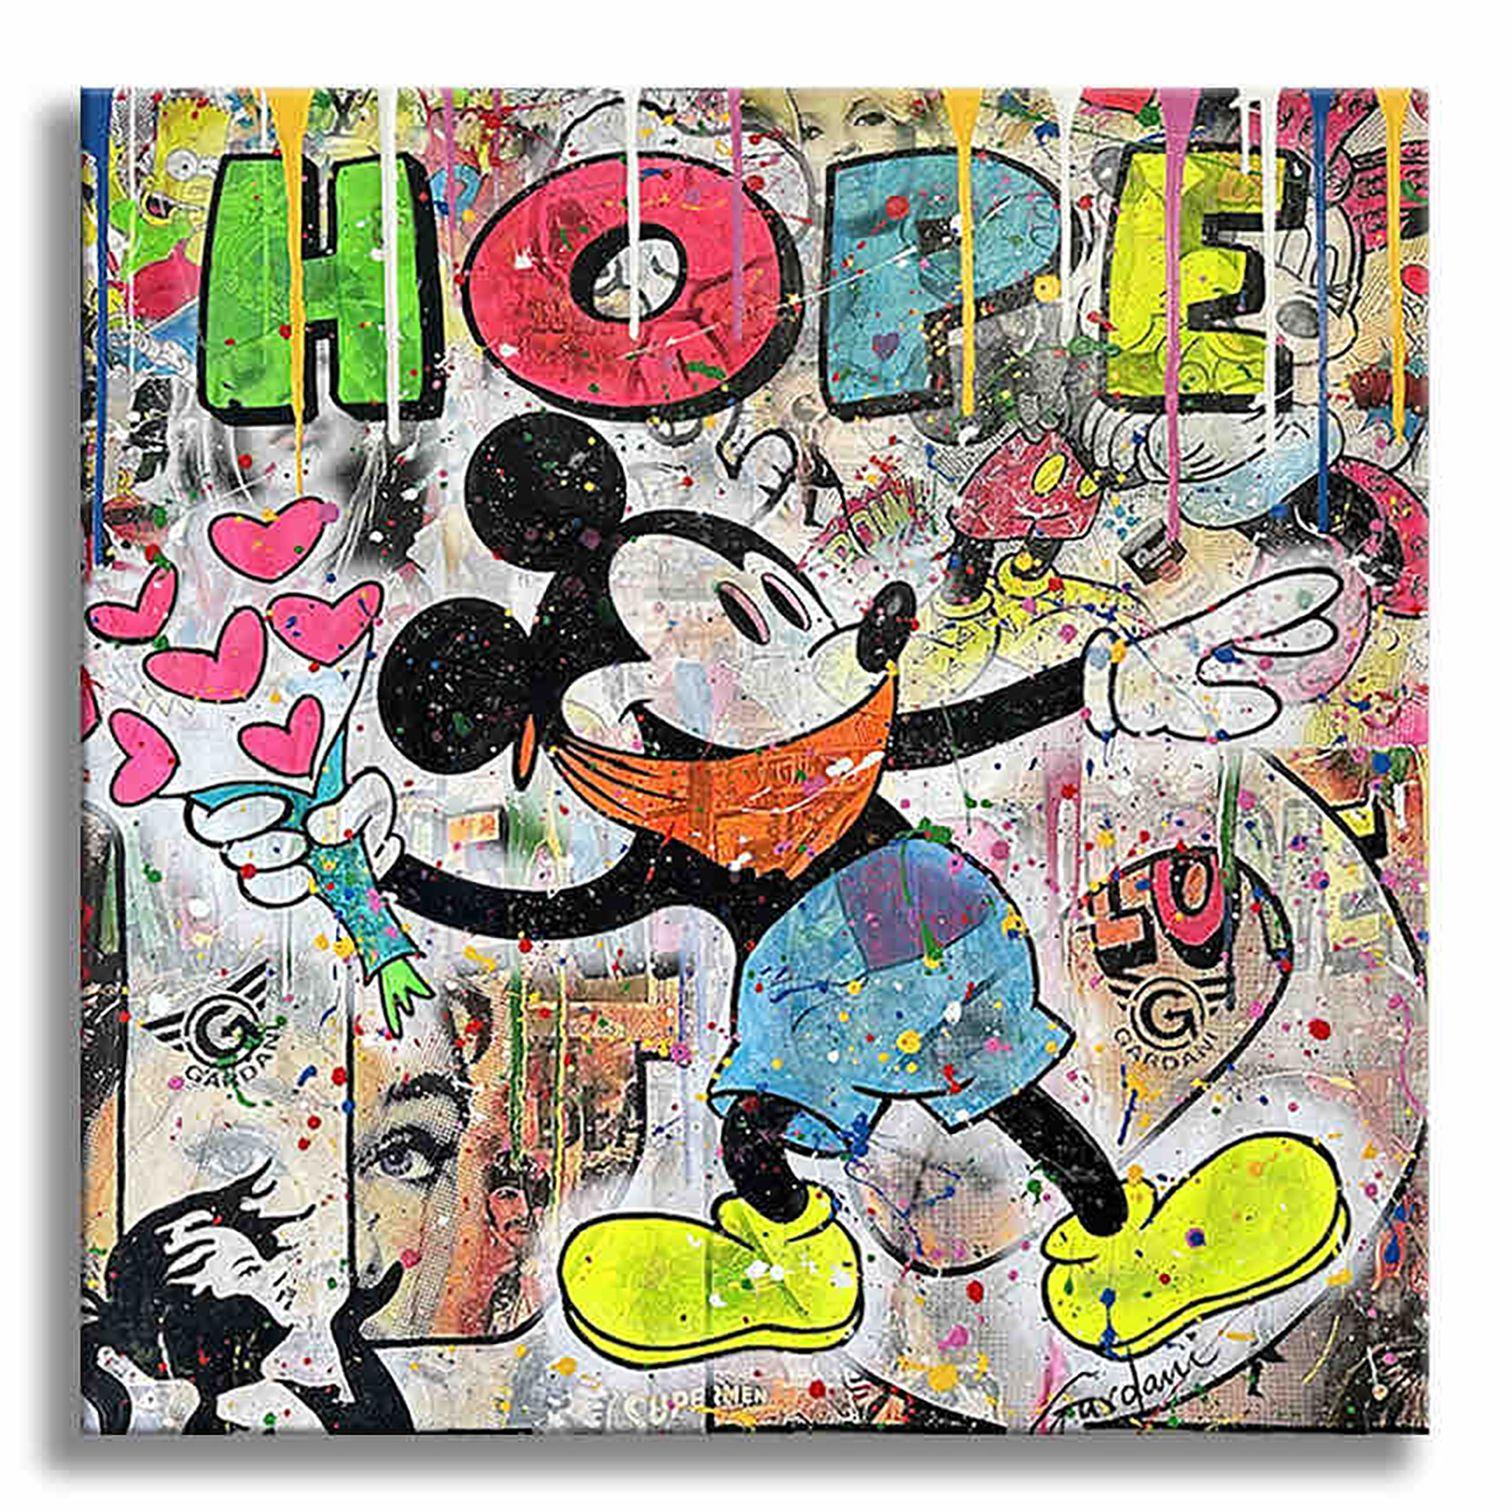 Choose Hope â€“ Original Painting on Canvas, Painting, Acrylic on Canvas For Sale 1